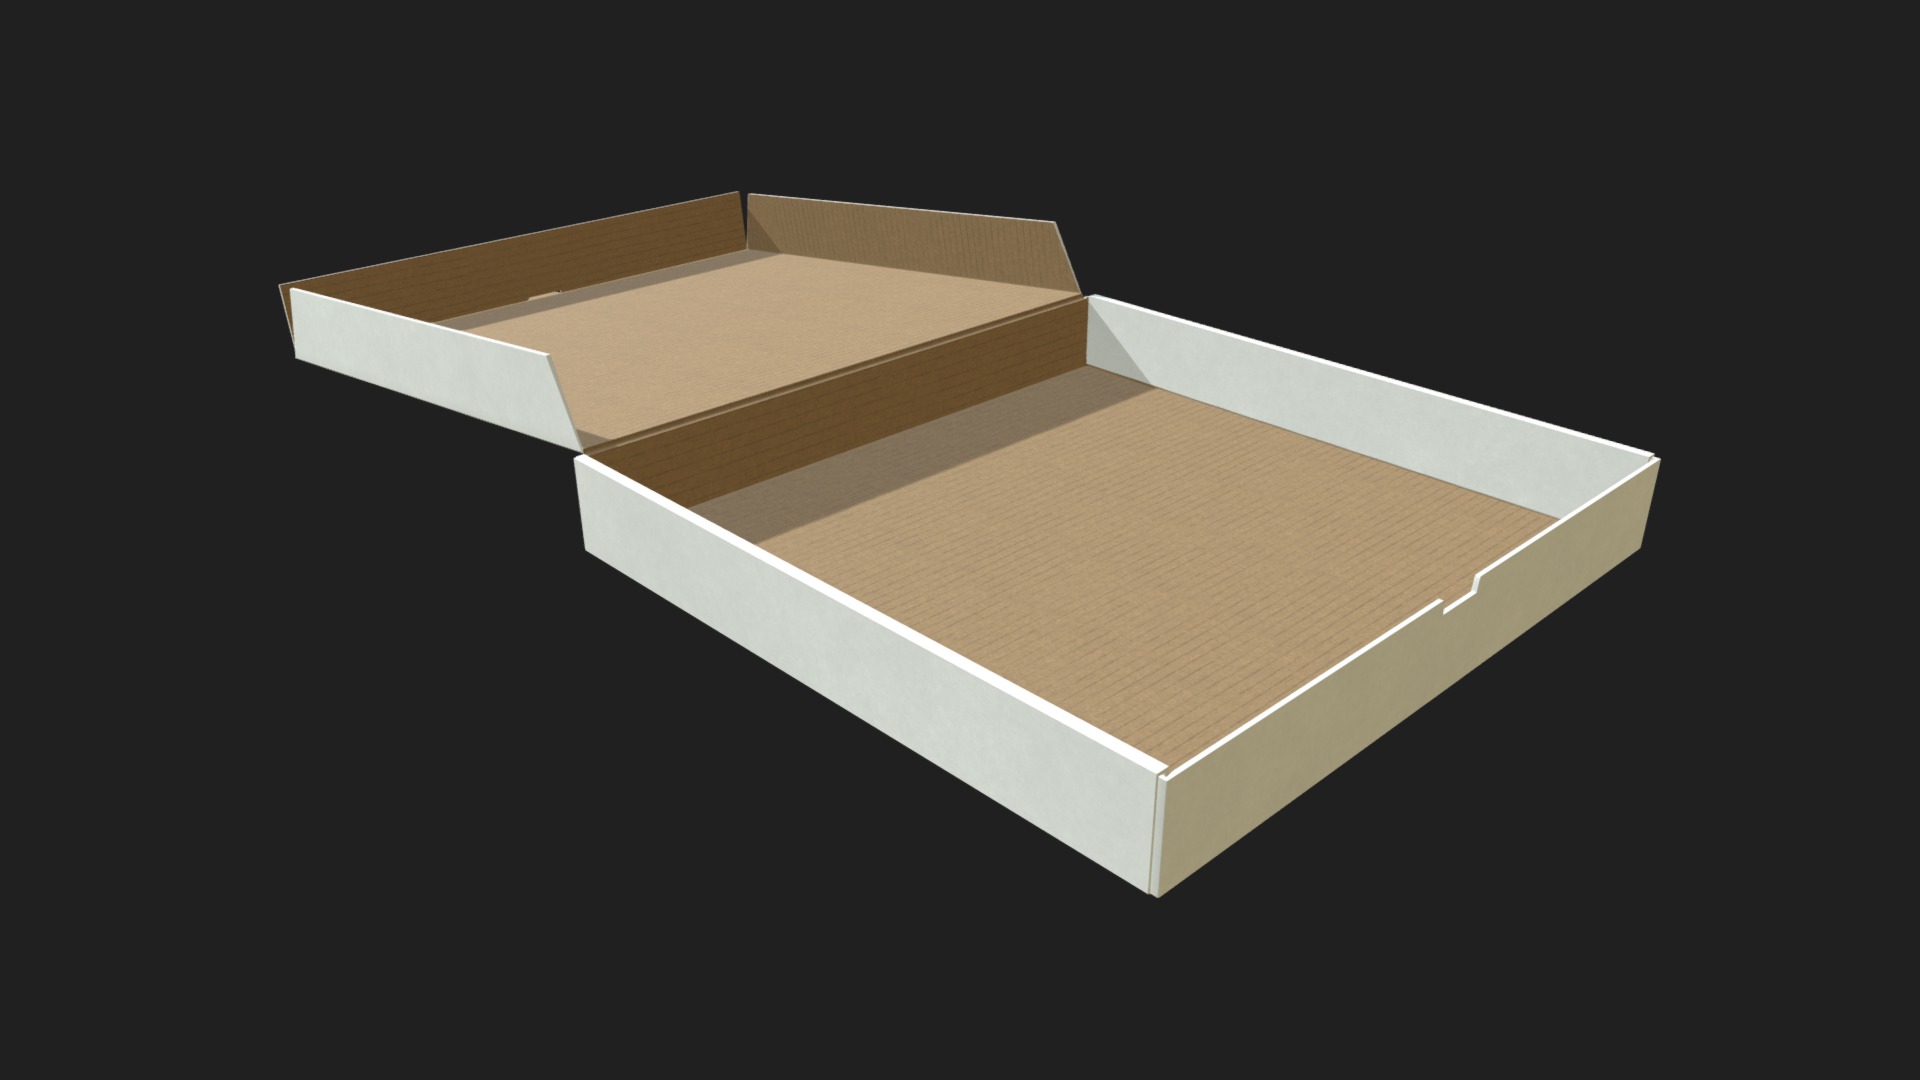 3D model Open pizza box - This is a 3D model of the Open pizza box. The 3D model is about a cardboard box on a black background.